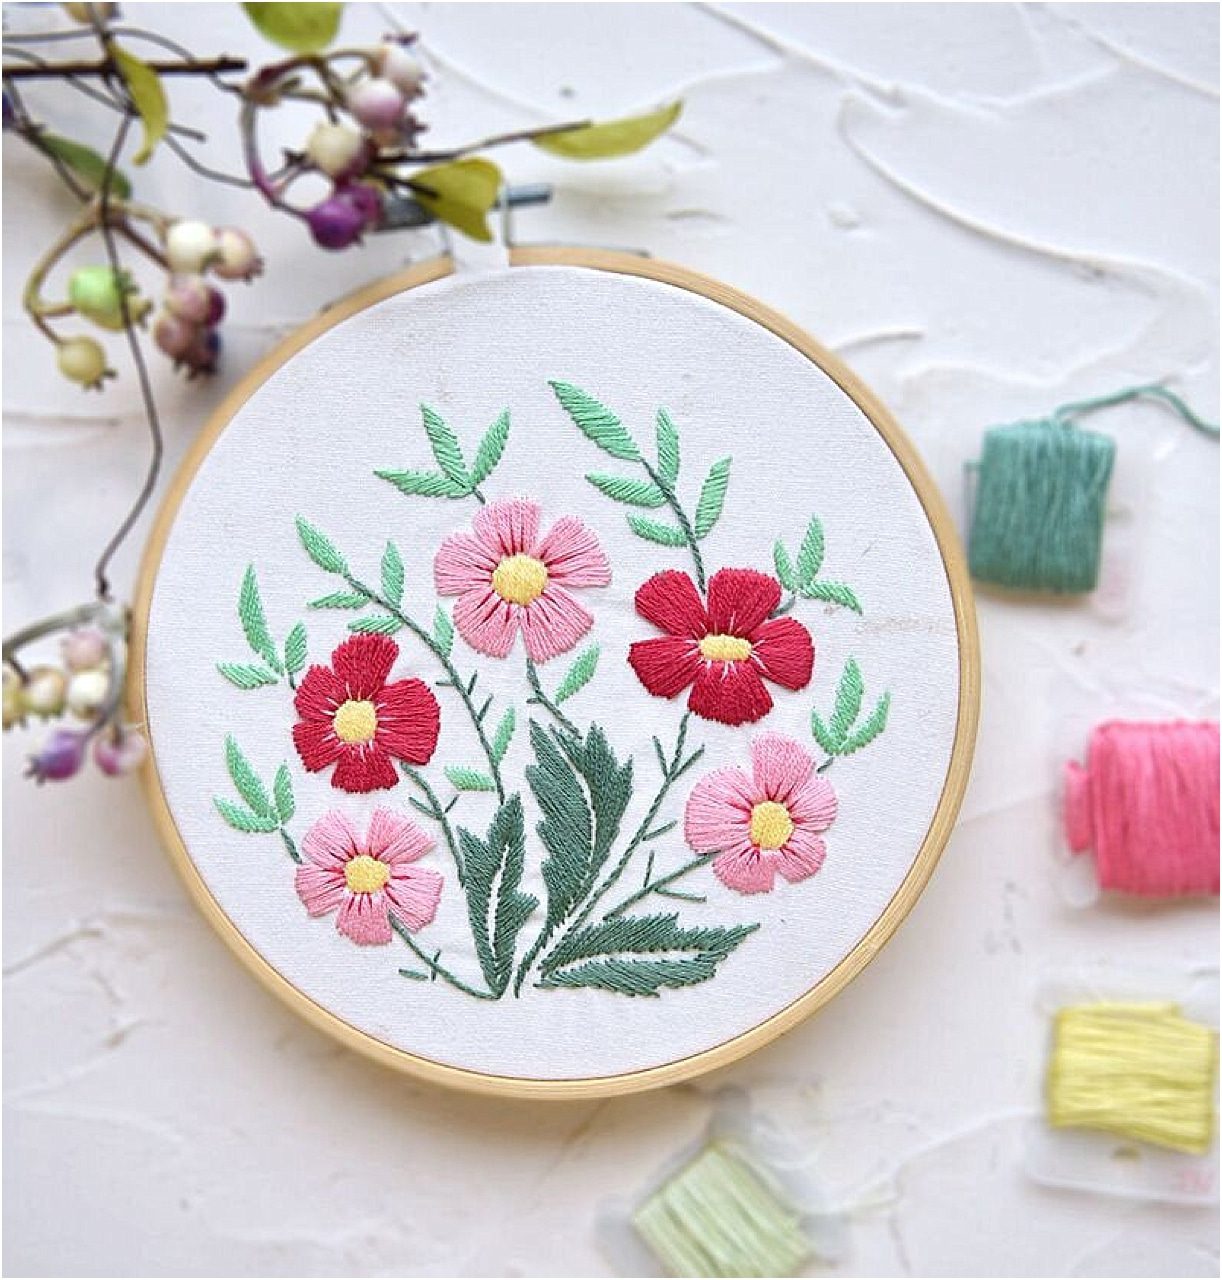 12 DIY Embroidery Designs for Your New Home | Hill City Bride Virginia Weddings Flowers